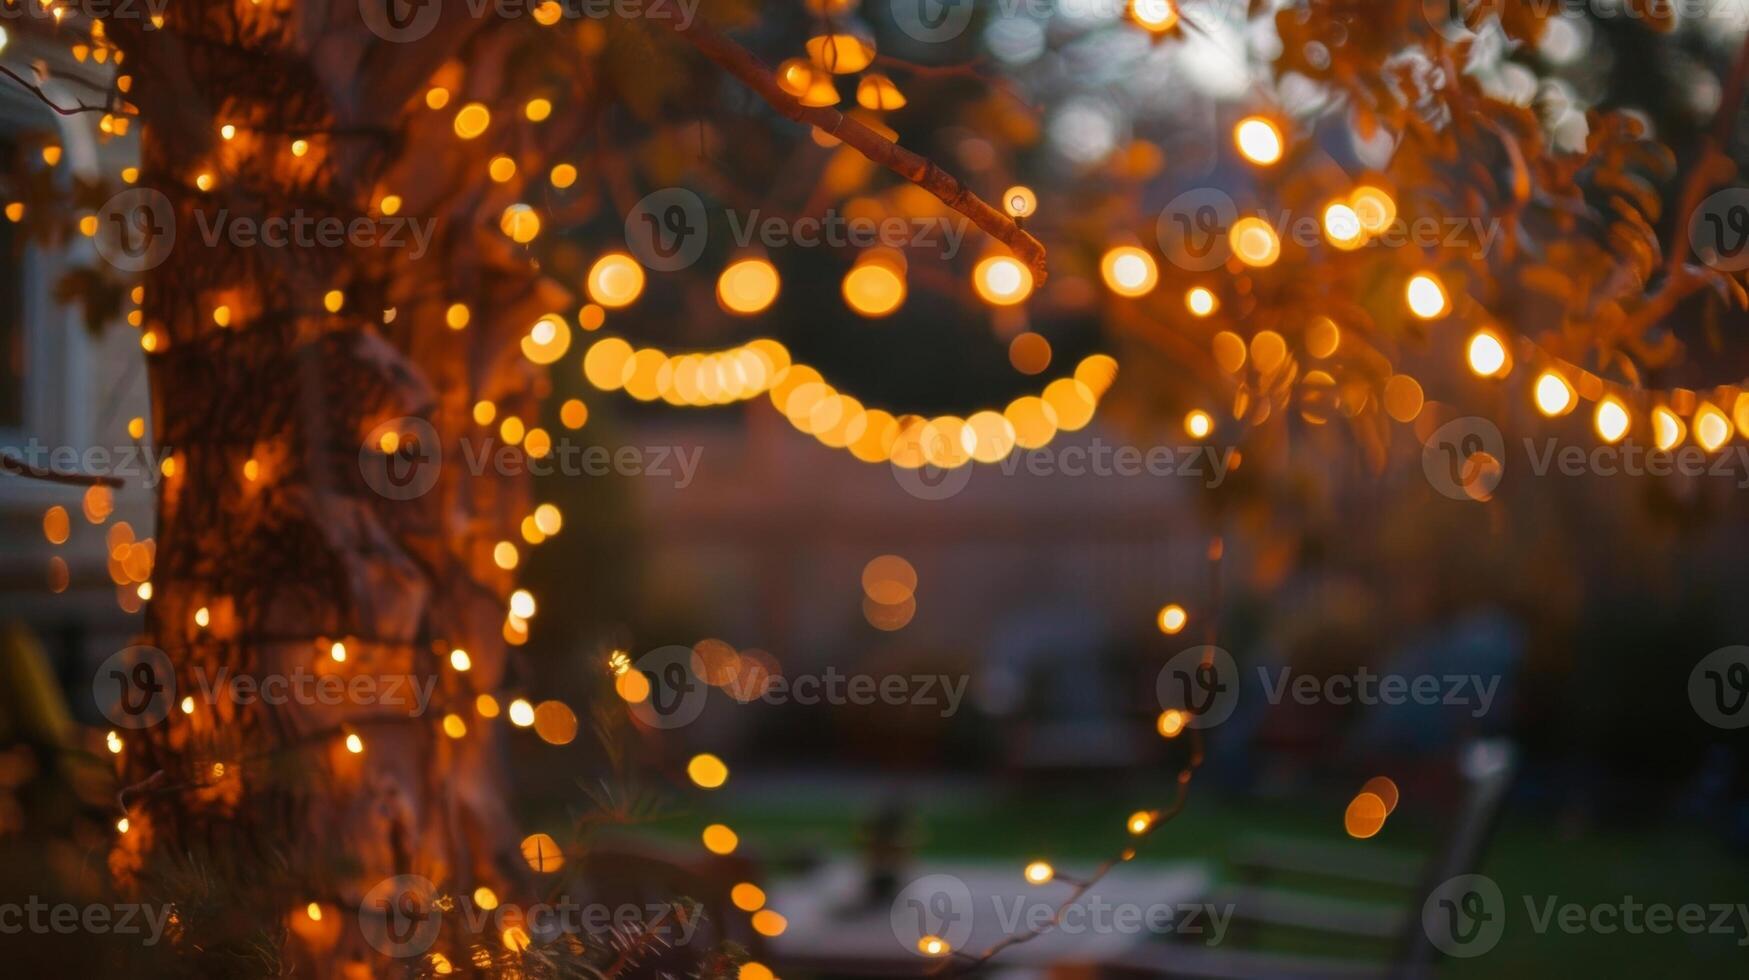 A canopy of string lights creates a magical atmosphere as dusk settles in casting a warm and inviting glow over the backyard. 2d flat cartoon photo